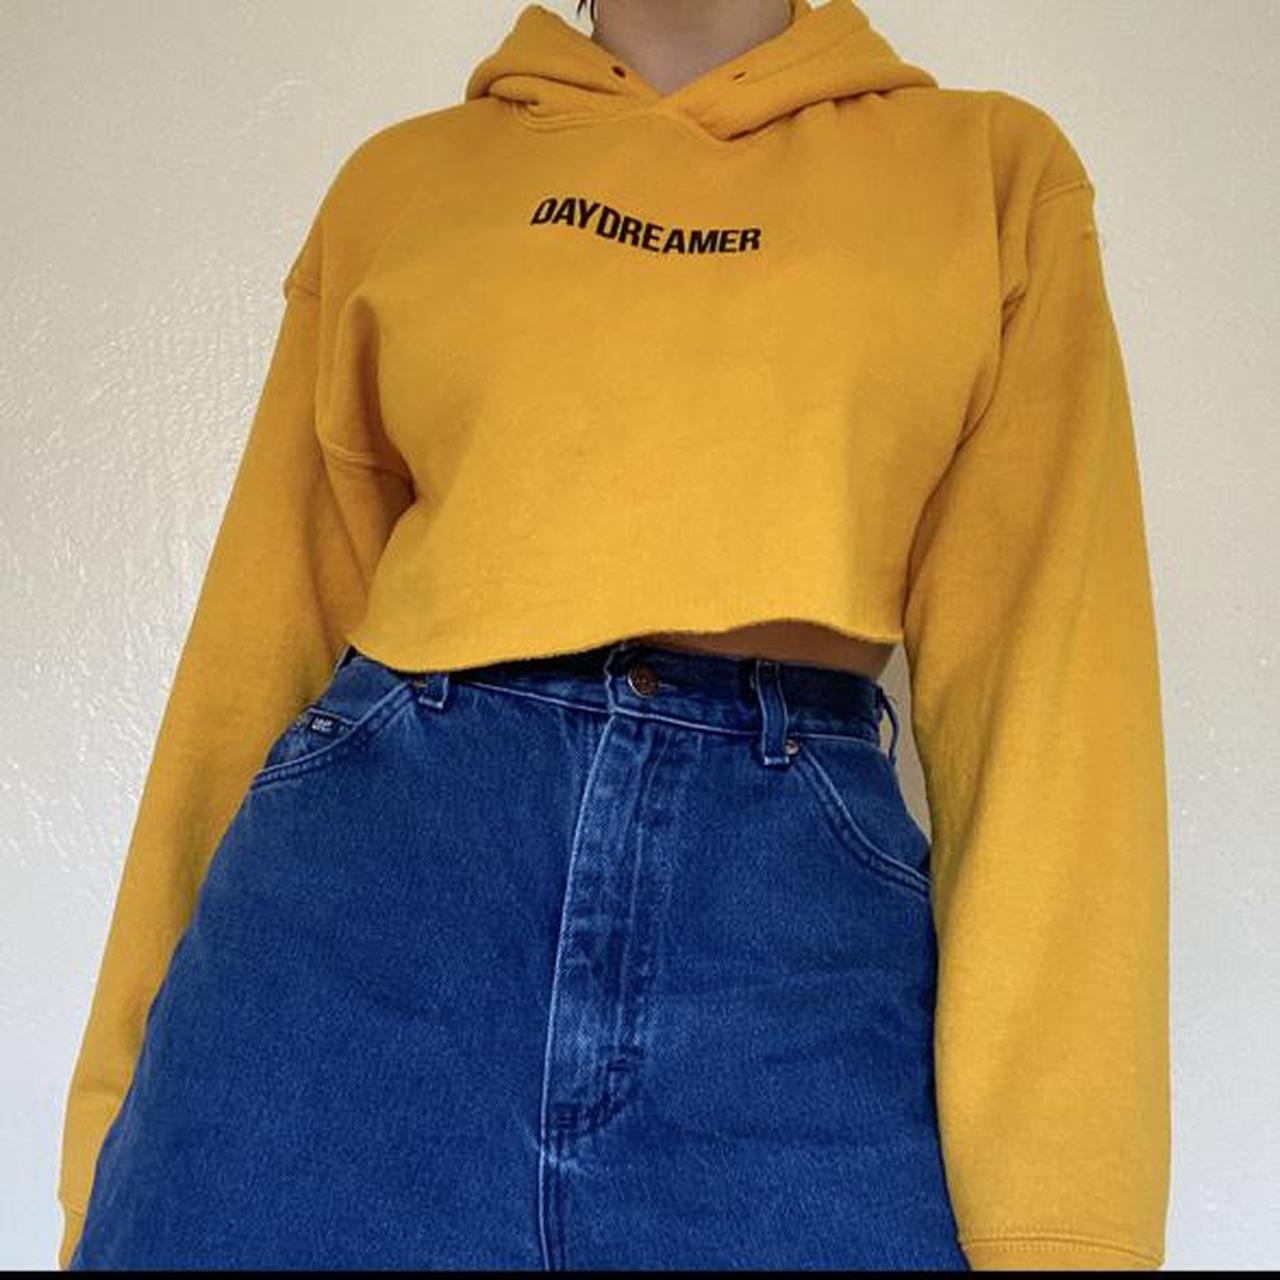 Product Image 3 - DAYDREAMER cropped hoodie 🧡
. golden